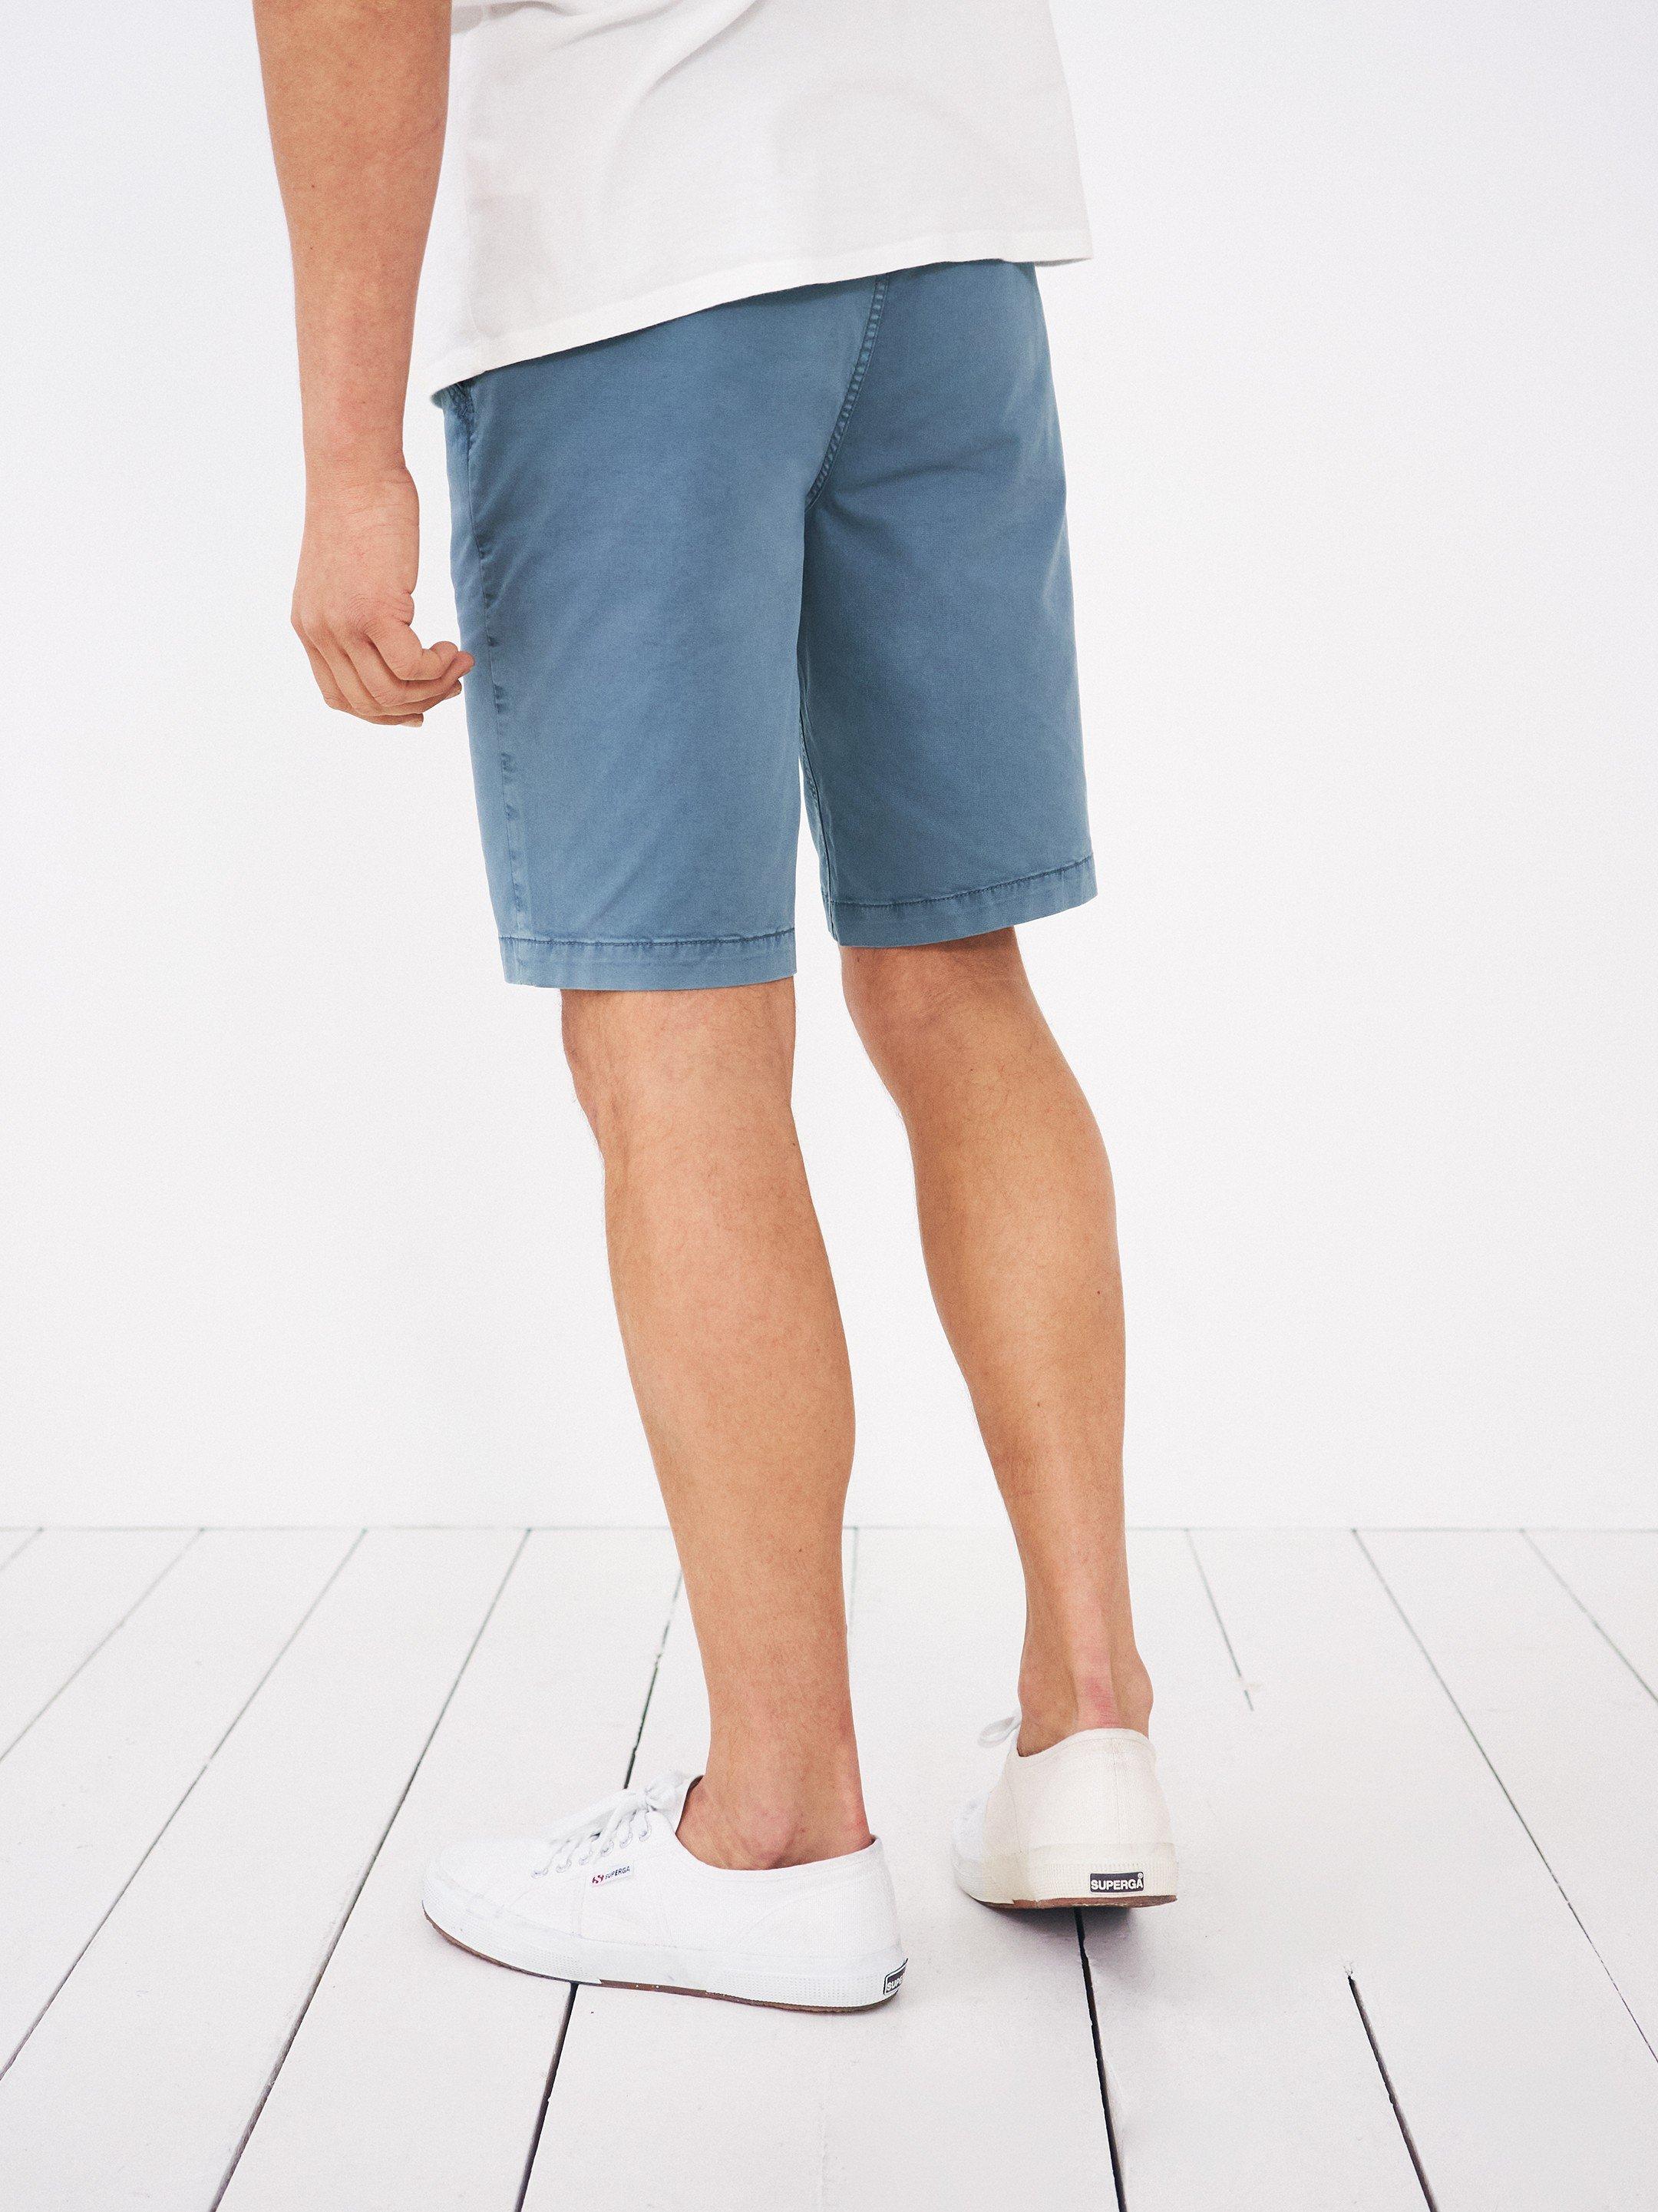 Sutton Organic Chino Shorts in MID BLUE - MODEL BACK